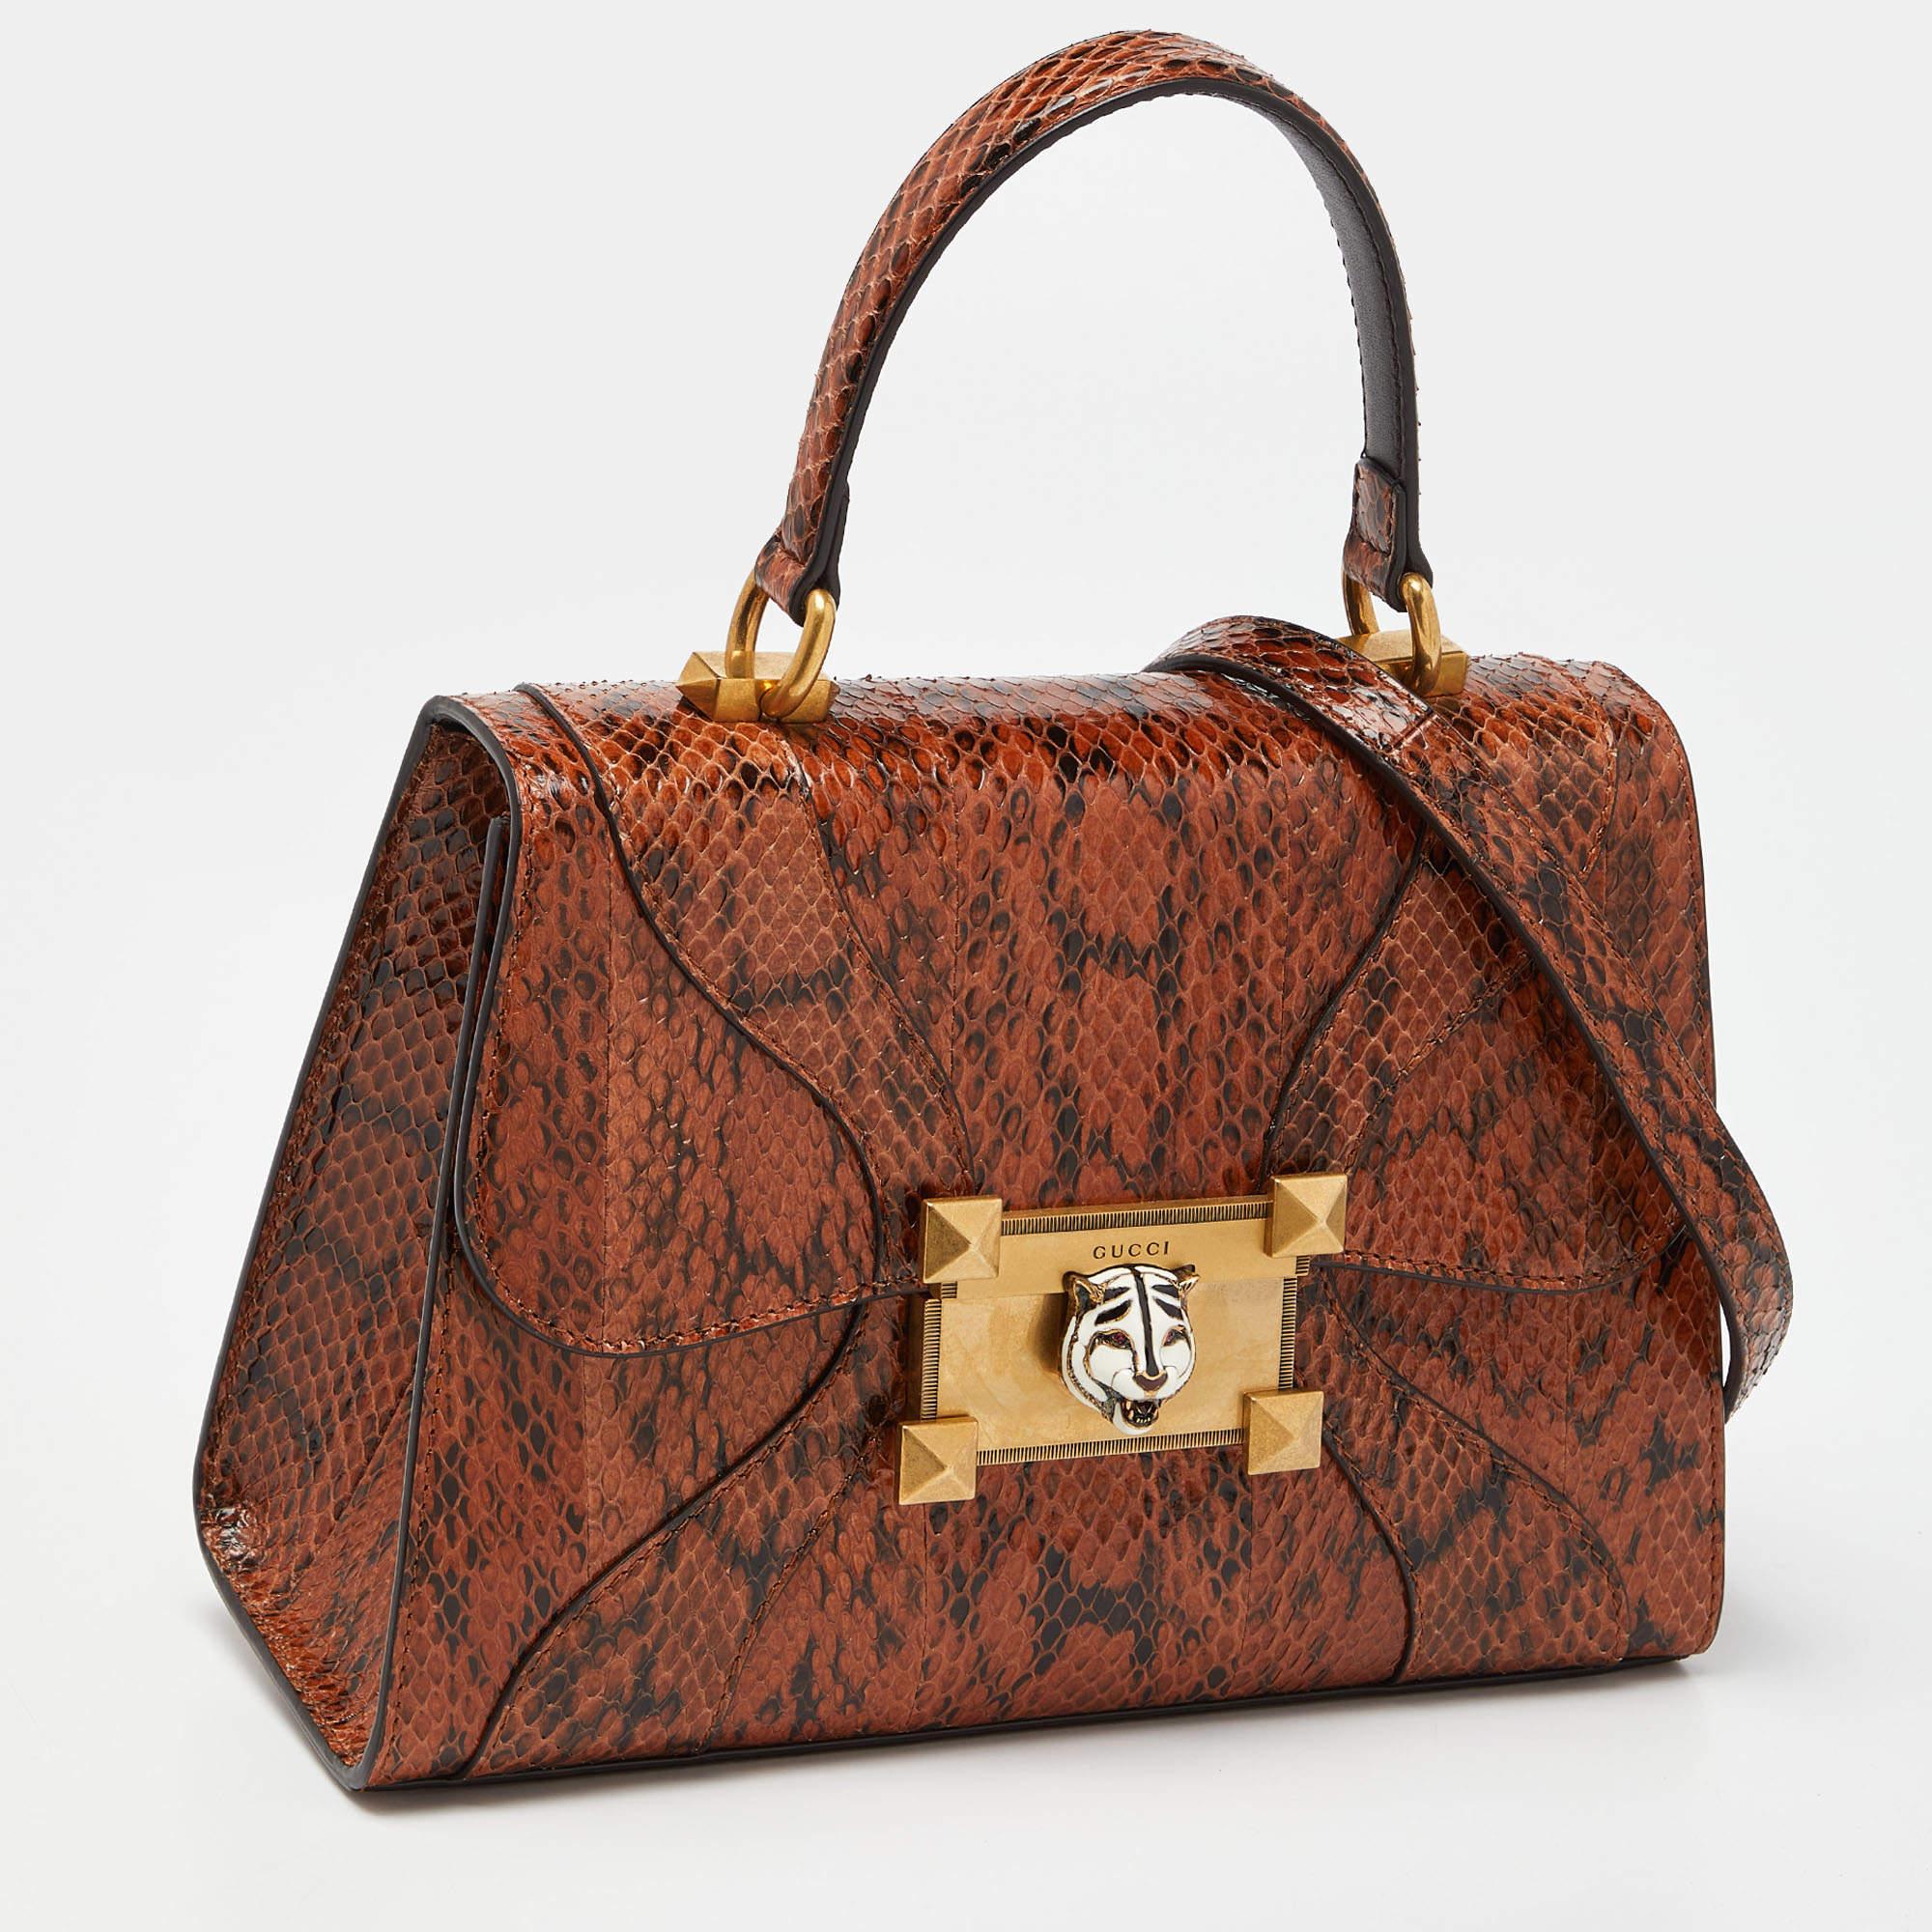 Exuding unparalleled elegance and sophistication, this Gucci bag is made from the finest material in a gorgeous hue. While the roomy interior offers ample space, the top handle allows you to carry it with much elegance.

